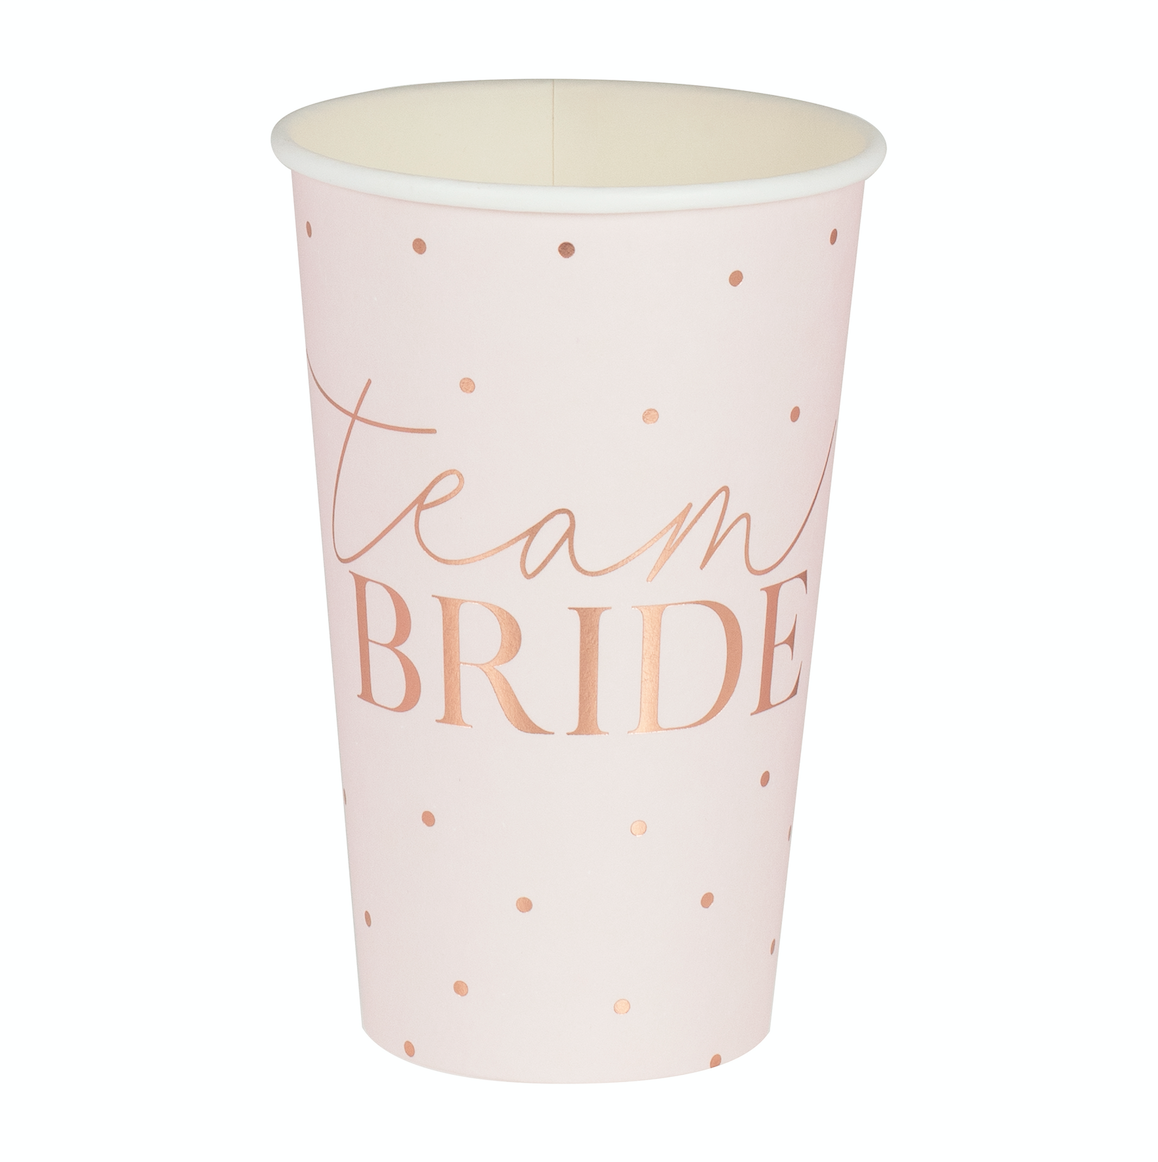 Rose Gold Team Bride Large Hen Party Cups